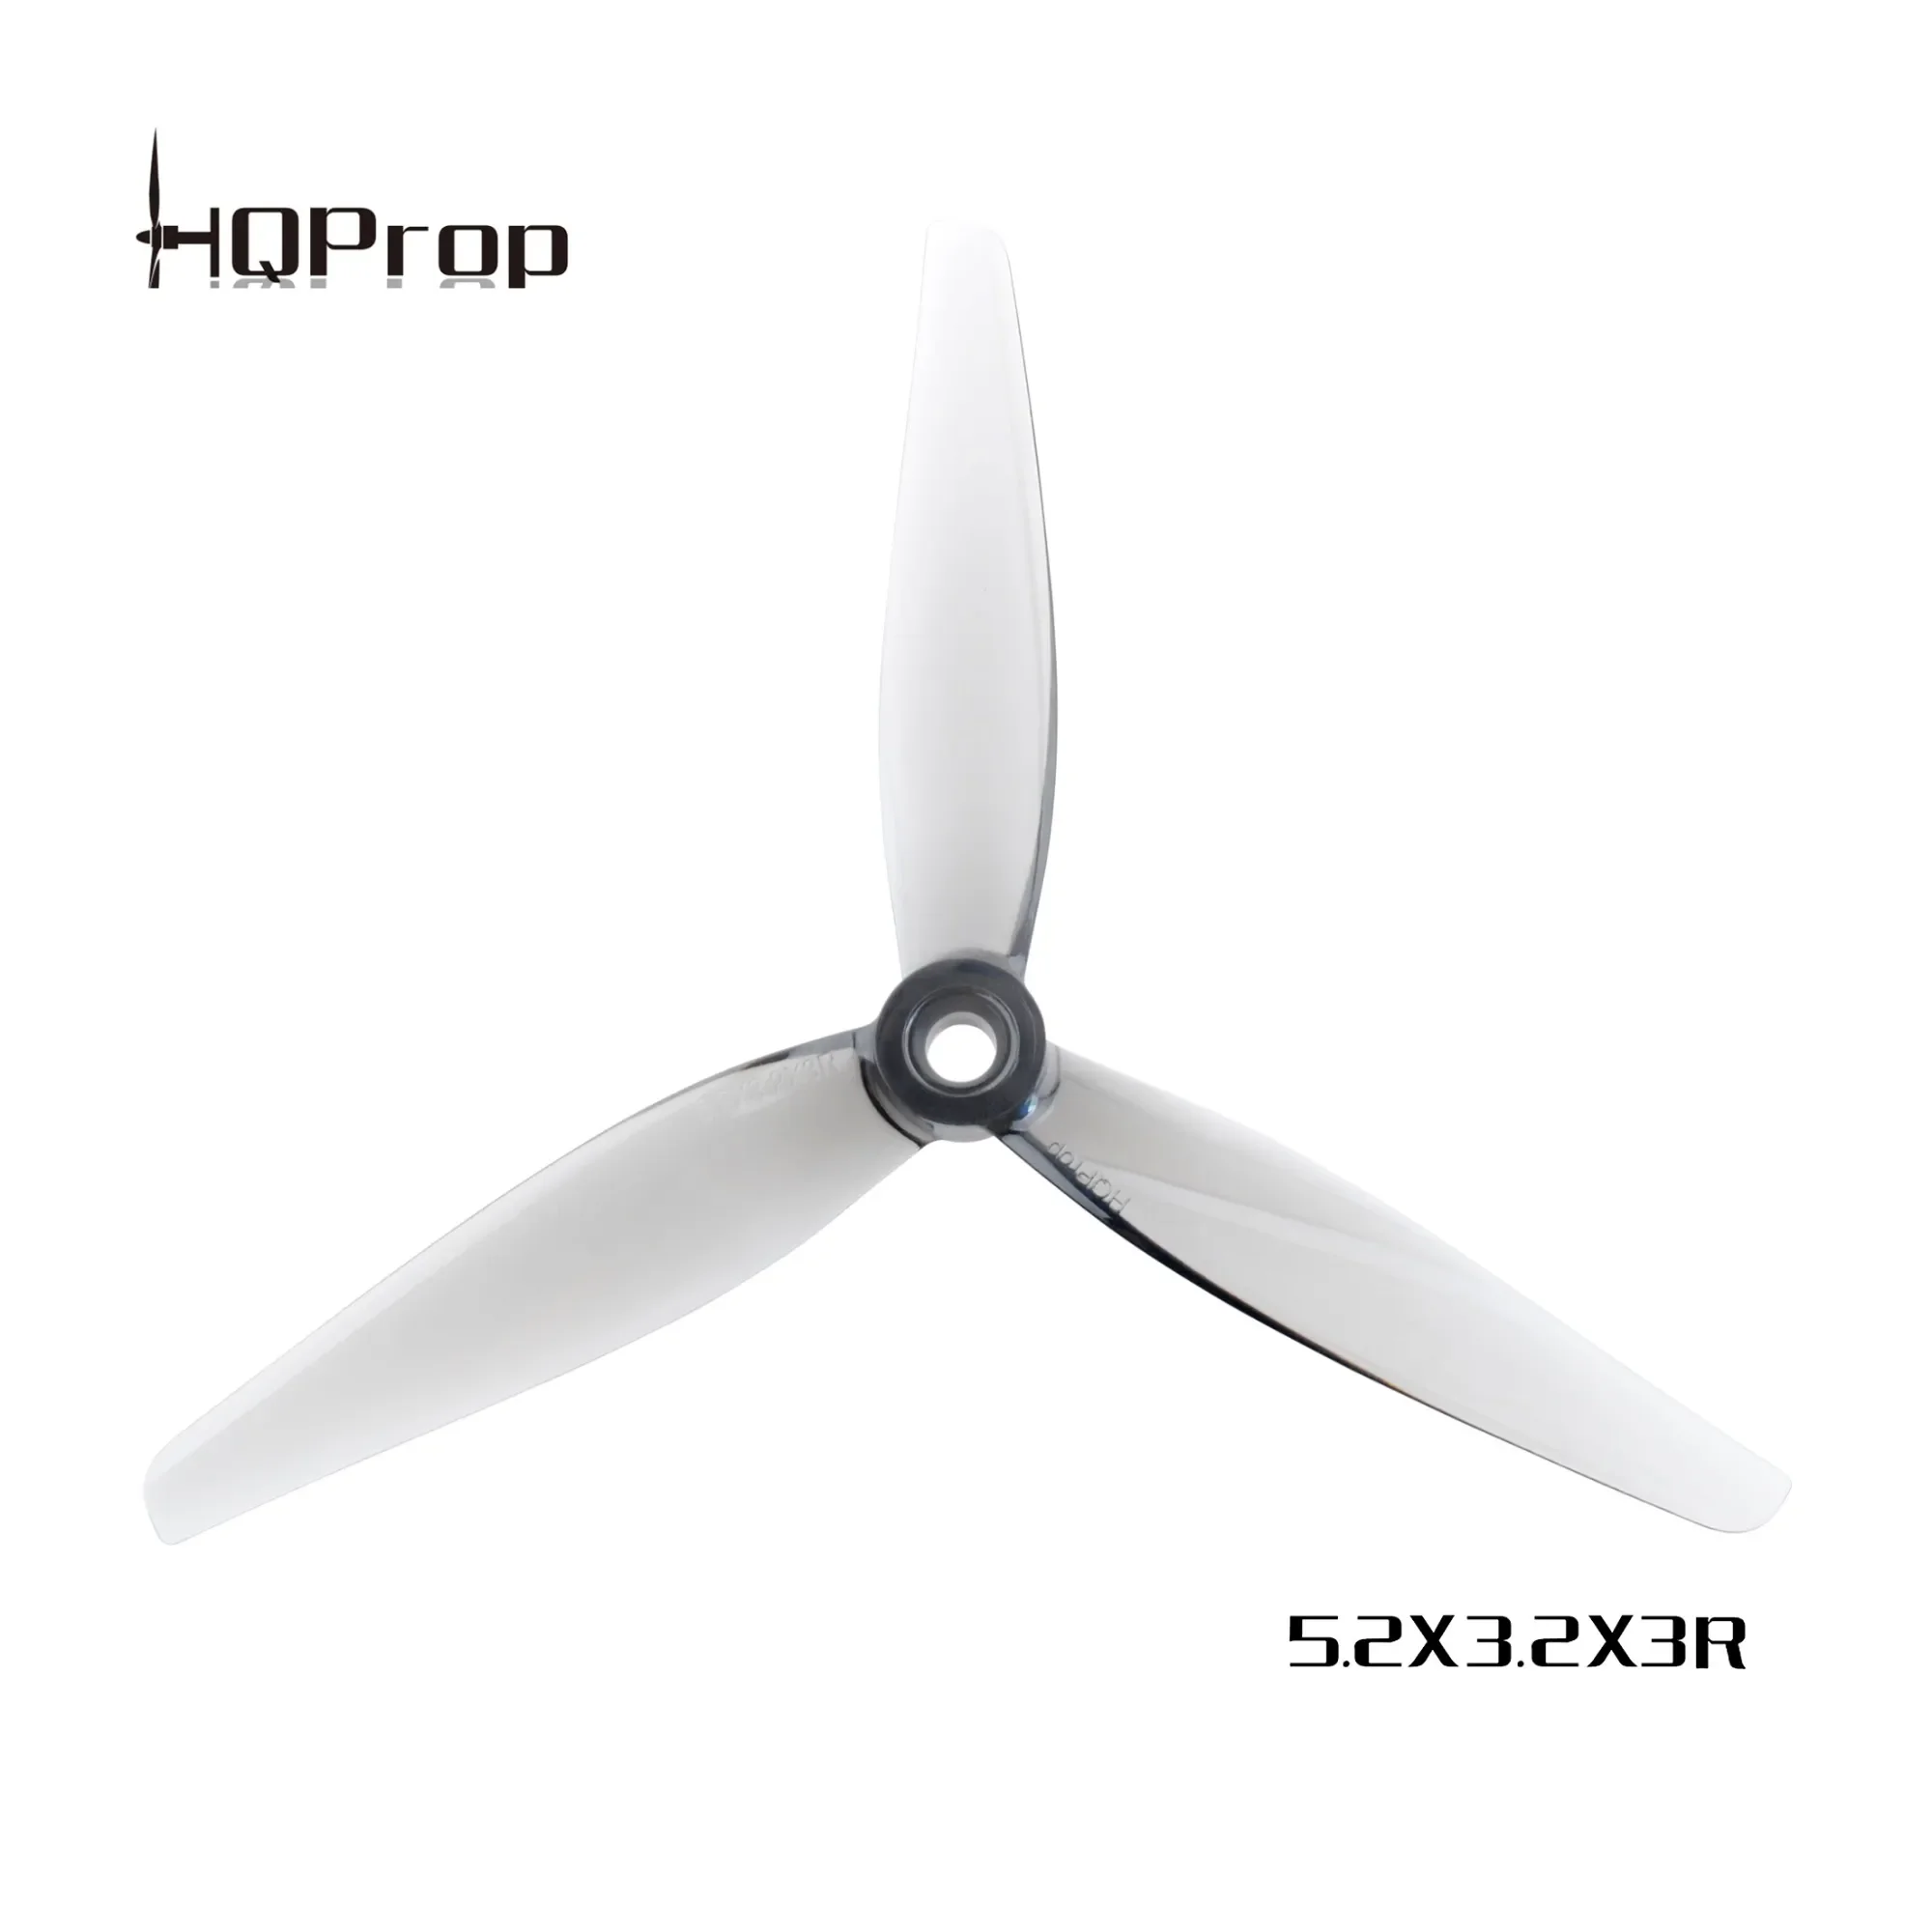 8PCS/4CW 4CCW HQProp 5.2X3.2X3  Poly Carbonate 5INCH Propeller For FPV Racing Drone